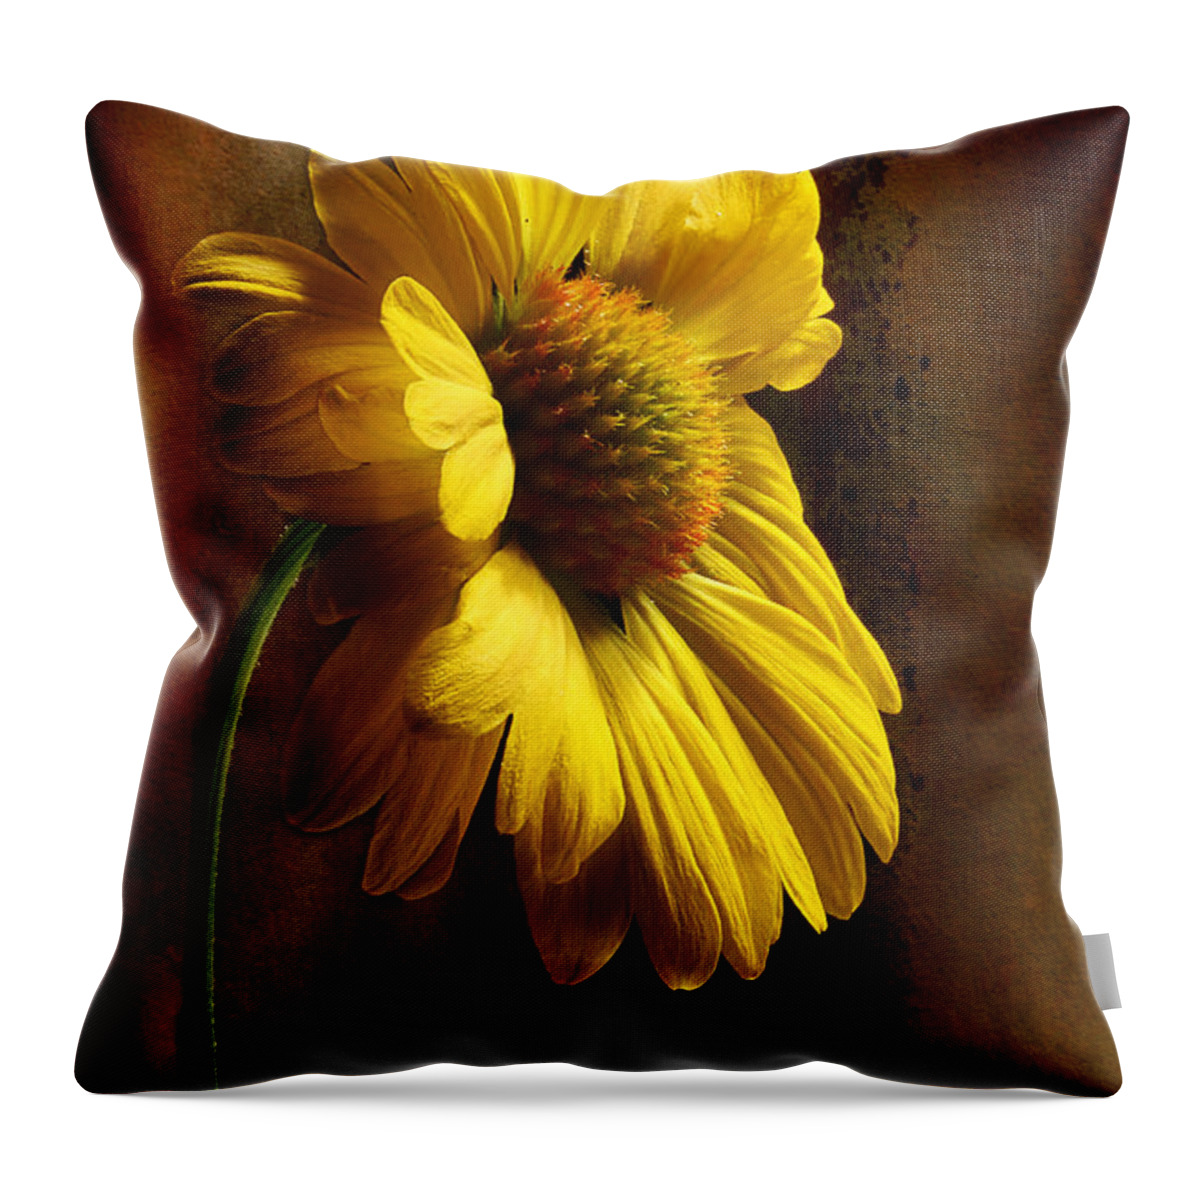 Daisy Throw Pillow featuring the photograph Happiness Is A Flower Shared by Michael Eingle